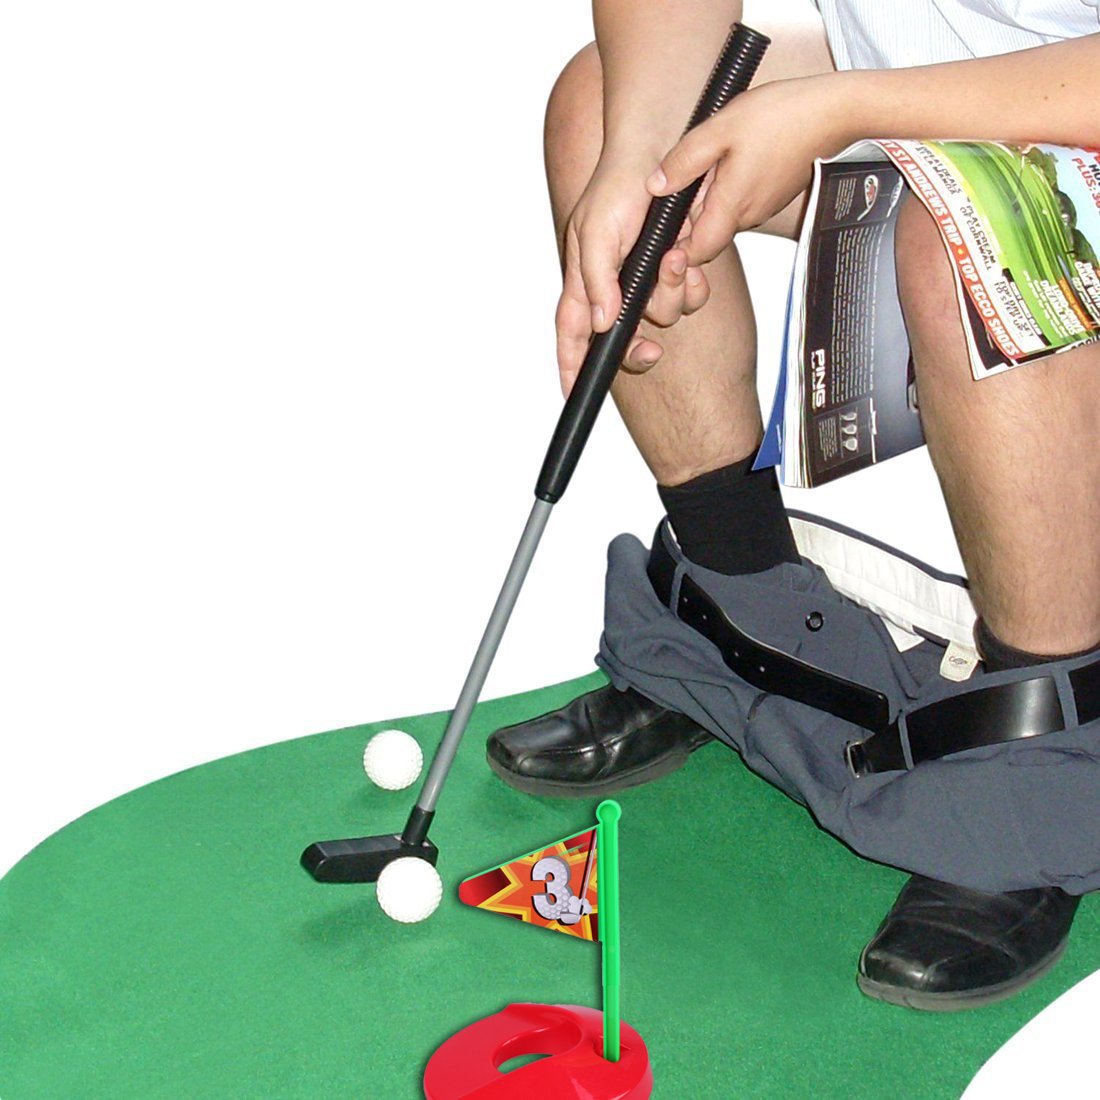 Toilet Golf Potty Time Putter Game - Funny White Elephant Gag Gifts for Adults Men Dad - Stupid Pranks Joke Dirty Christmas Holiday Present Exchange Ideas - Mini Bathroom Putting Green Mat Toy Set